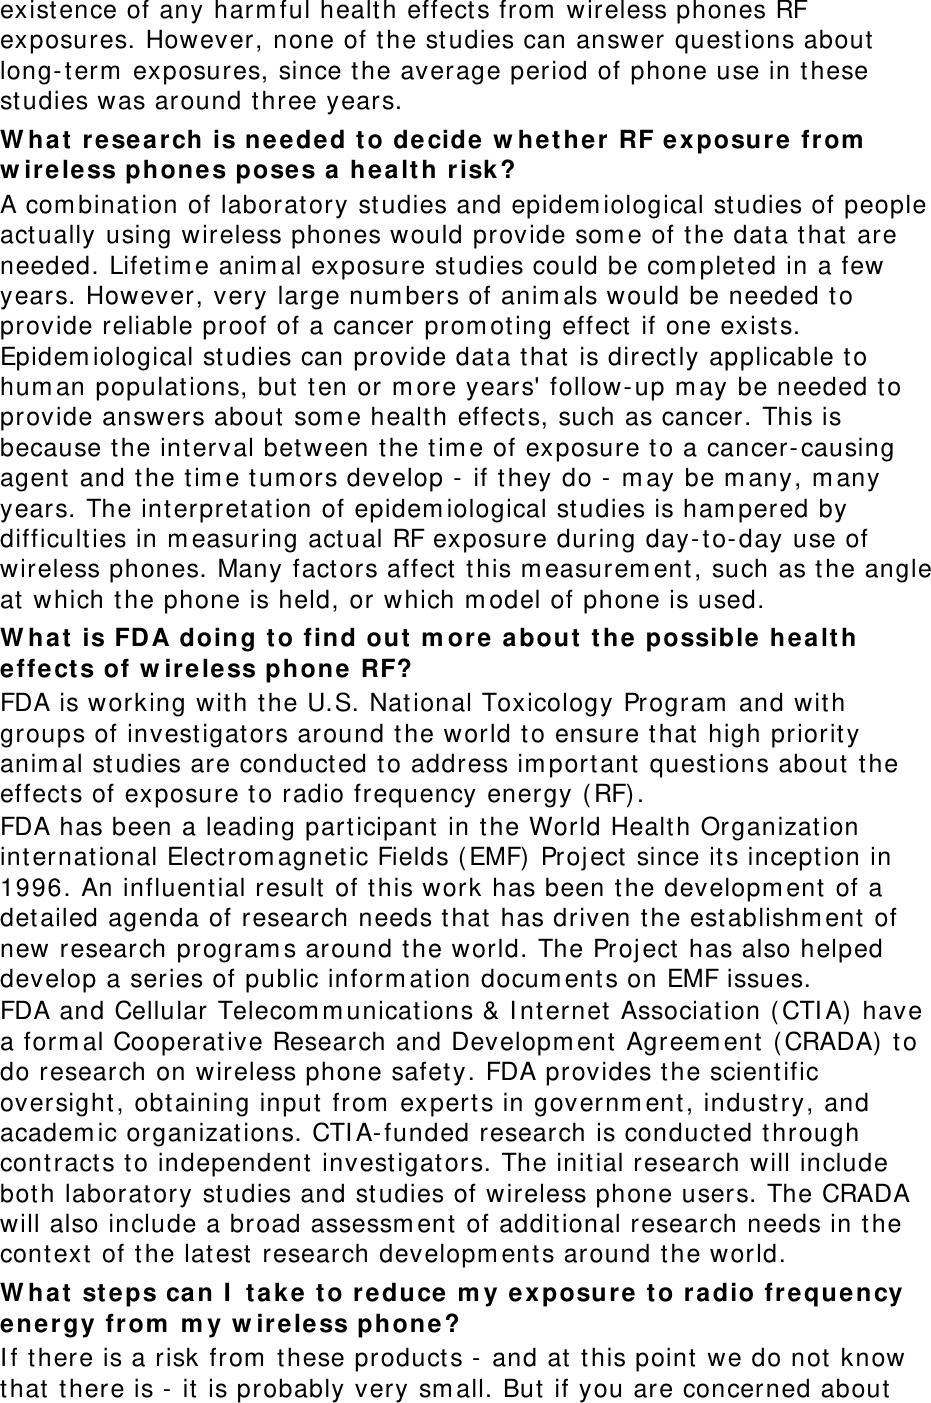 existence of any harm ful health effect s from  wireless phones RF exposures. However, none of t he st udies can answer quest ions about long- term  exposures, since t he average period of phone use in t hese studies was around t hree years. W ha t resea rch is needed t o decide w hether RF ex posure from  w ir ele ss phone s poses a  he alt h r isk ? A com bination of laboratory studies and epidem iological studies of people act ually using wireless phones would provide som e of t he data t hat are needed. Lifetim e anim al exposure studies could be com plet ed in a few years. However, very large num bers of anim als would be needed t o provide reliable proof of a cancer prom ot ing effect  if one exists. Epidem iological st udies can provide dat a t hat is directly applicable t o hum an populat ions, but  t en or m ore years&apos; follow- up m ay be needed t o provide answers about  som e health effect s, such as cancer. This is because the int erval bet ween the tim e of exposure t o a cancer- causing agent and t he t im e tum ors develop -  if t hey do -  m ay be m any, m any years. The int erpretation of epidem iological studies is ham pered by difficult ies in m easuring act ual RF exposure during day- t o-day use of wireless phones. Many fact ors affect  t his m easurem ent, such as t he angle at  which t he phone is held, or which m odel of phone is used. W ha t is FDA doing to find out  m ore about  t he  possible  he alt h effect s of w ir eless phone  RF? FDA is working wit h t he U.S. National Toxicology Program  and with groups of invest igators around the world t o ensure t hat high priority anim al st udies are conduct ed to address im port ant  questions about  the effect s of exposure to radio frequency energy (RF) . FDA has been a leading participant  in the World Health Organization int ernat ional Electrom agnetic Fields ( EMF)  Project  since its incept ion in 1996. An influential result of t his work has been the developm ent of a det ailed agenda of research needs that  has driven t he est ablishm ent  of new research program s around t he world. The Project  has also helped develop a series of public inform ation docum ent s on EMF issues. FDA and Cellular Telecom m unications &amp; I nt ernet  Associat ion ( CTI A)  have a form al Cooperative Research and Developm ent  Agreem ent  ( CRADA)  t o do research on wireless phone safet y. FDA provides the scientific oversight , obtaining input from  experts in governm ent, indust ry, and academ ic organizat ions. CTI A- funded research is conduct ed t hrough cont ract s to independent invest igat ors. The initial research will include both laboratory studies and st udies of wireless phone users. The CRADA will also include a broad assessm ent  of additional research needs in t he cont ext  of t he lat est  research developm ents around t he world. W ha t steps can I  tak e t o re duce  m y ex posure to ra dio fr equency en ergy fr om  m y w ireless phone? I f t here is a risk from  t hese product s -  and at  t his point we do not  know that  t here is - it is probably very sm all. But  if you are concerned about 